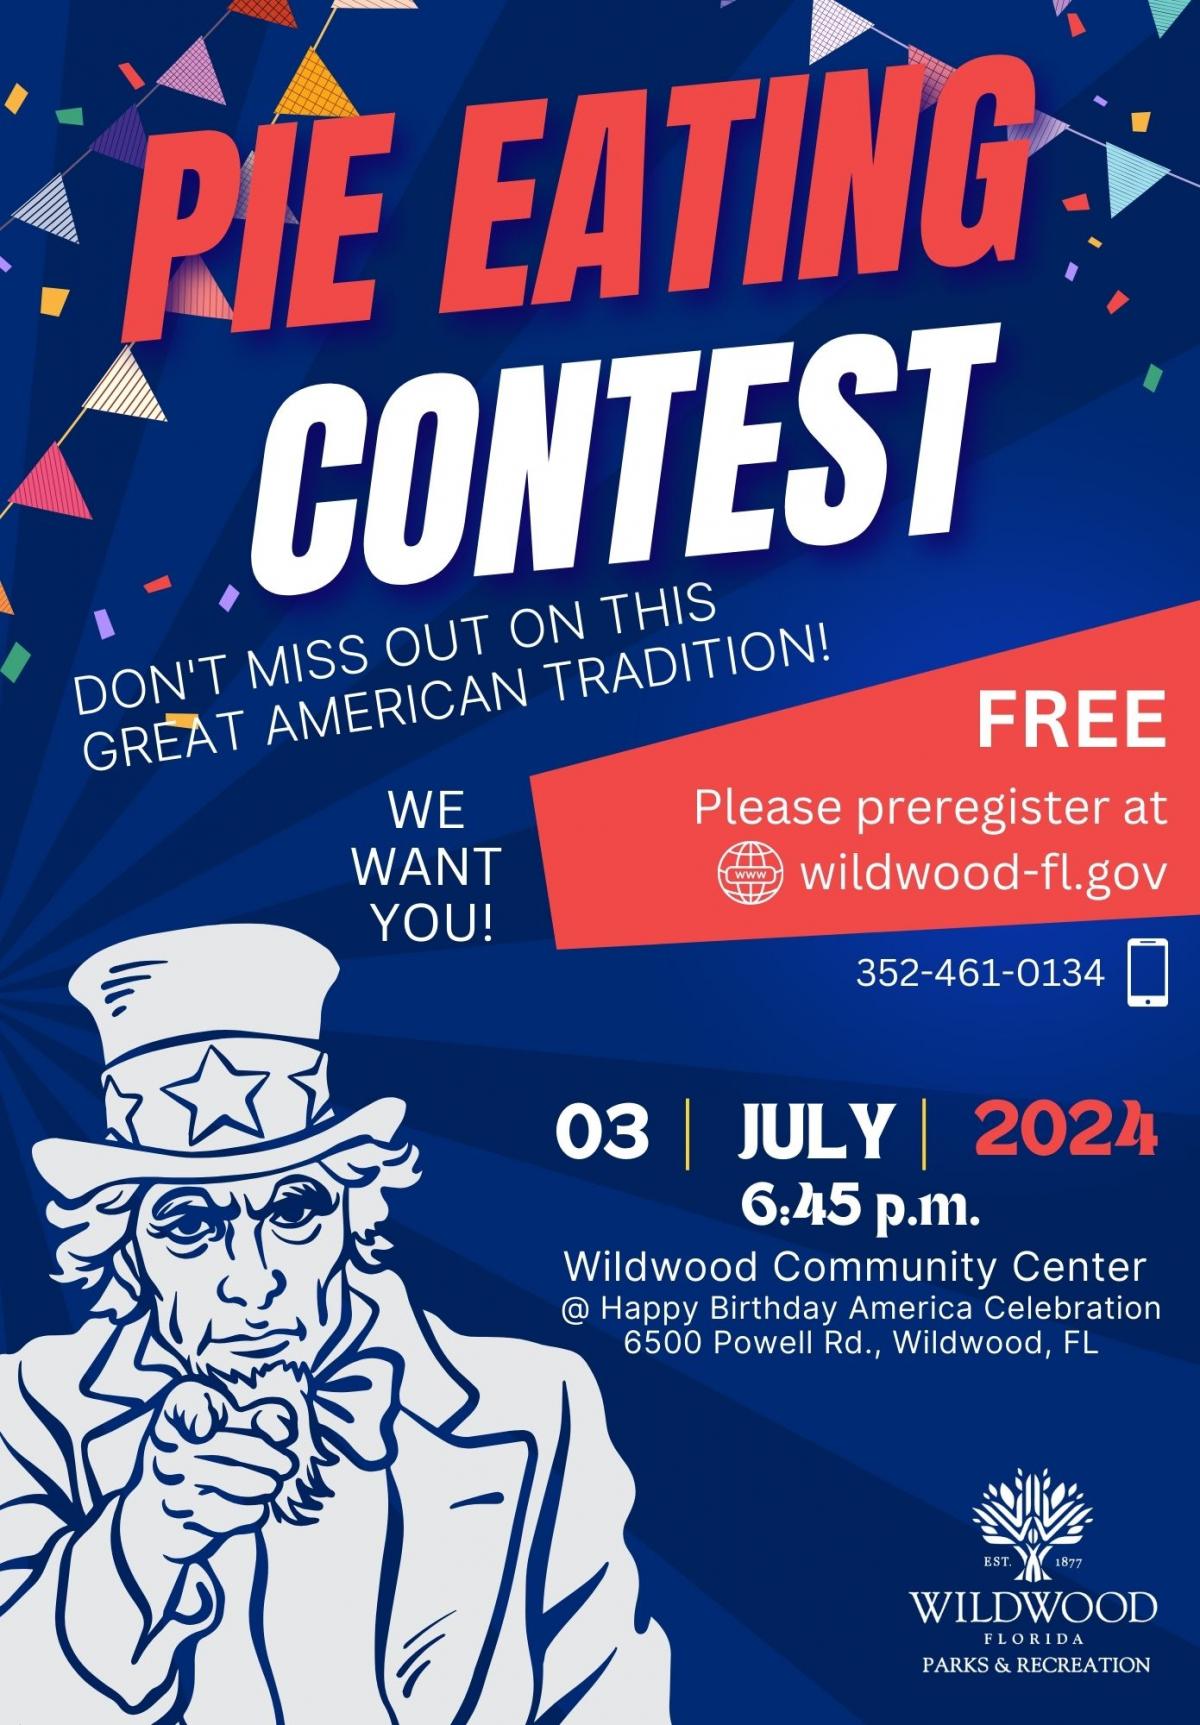 Pie Eating Contest, Wildwood Community Center, 6500 Powell Rd, Wednesday, July 3, 2024, 6:45 p.m.